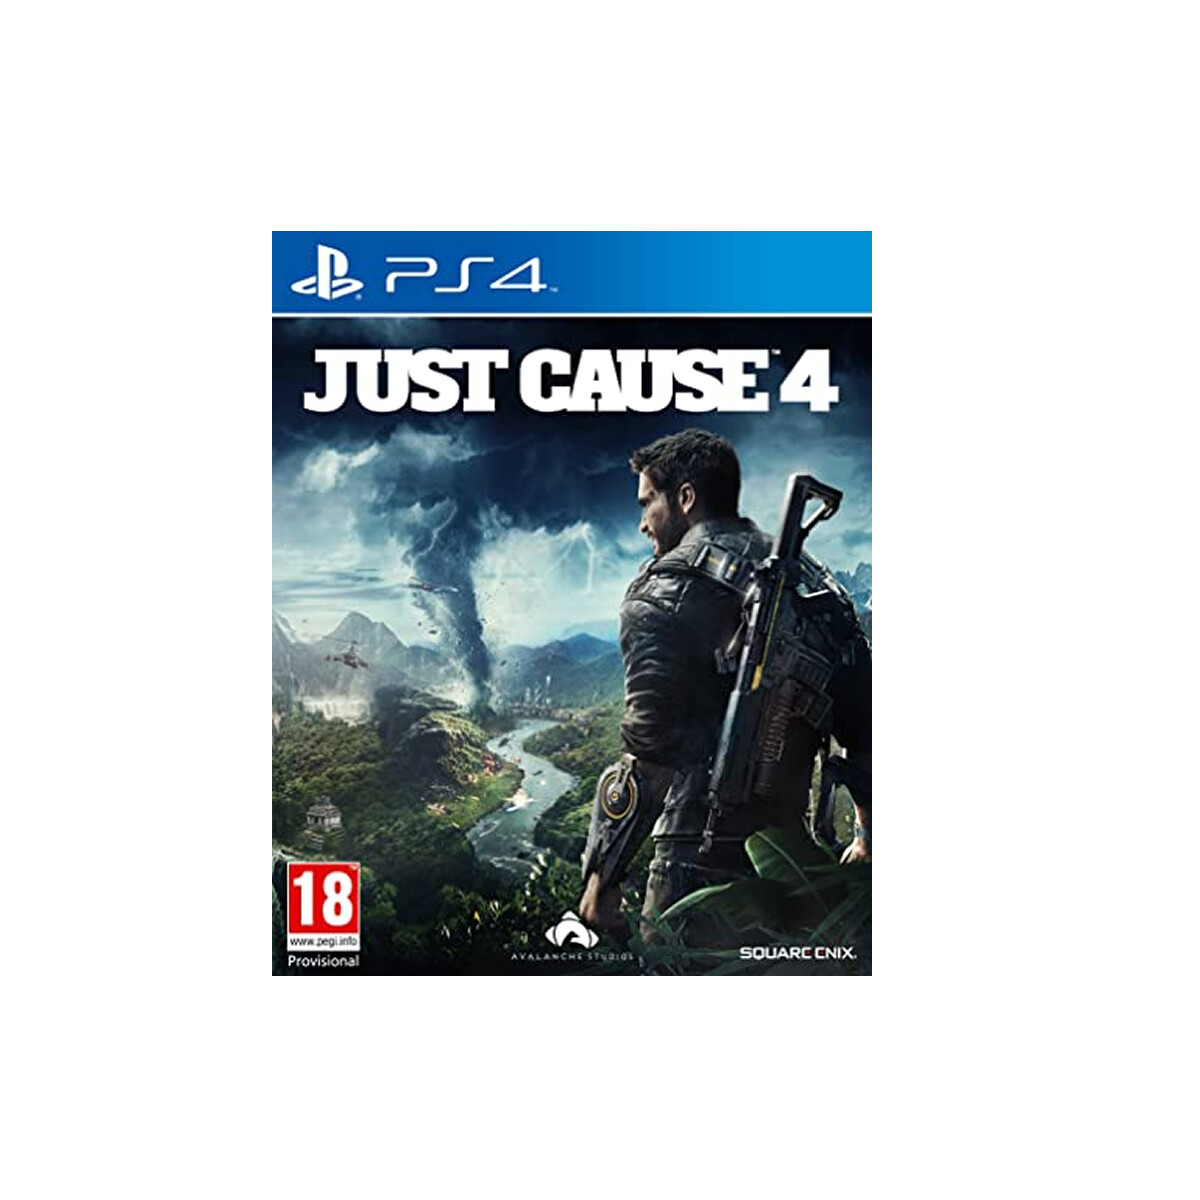 PS4 JUST CAUSE 4 